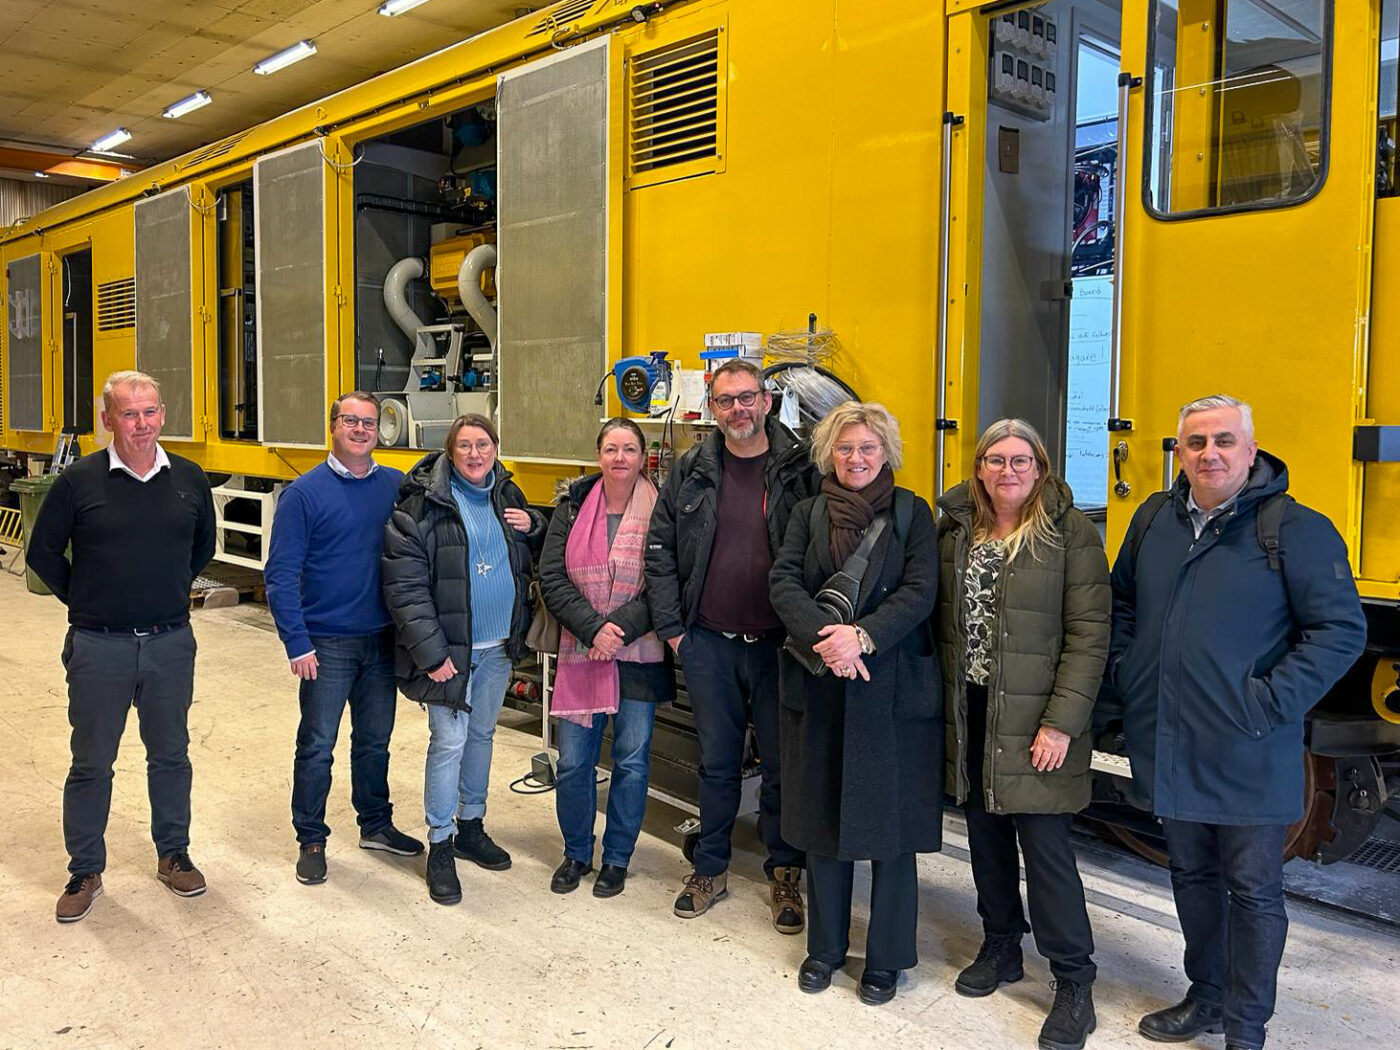 The Transport Committee visited Railcare